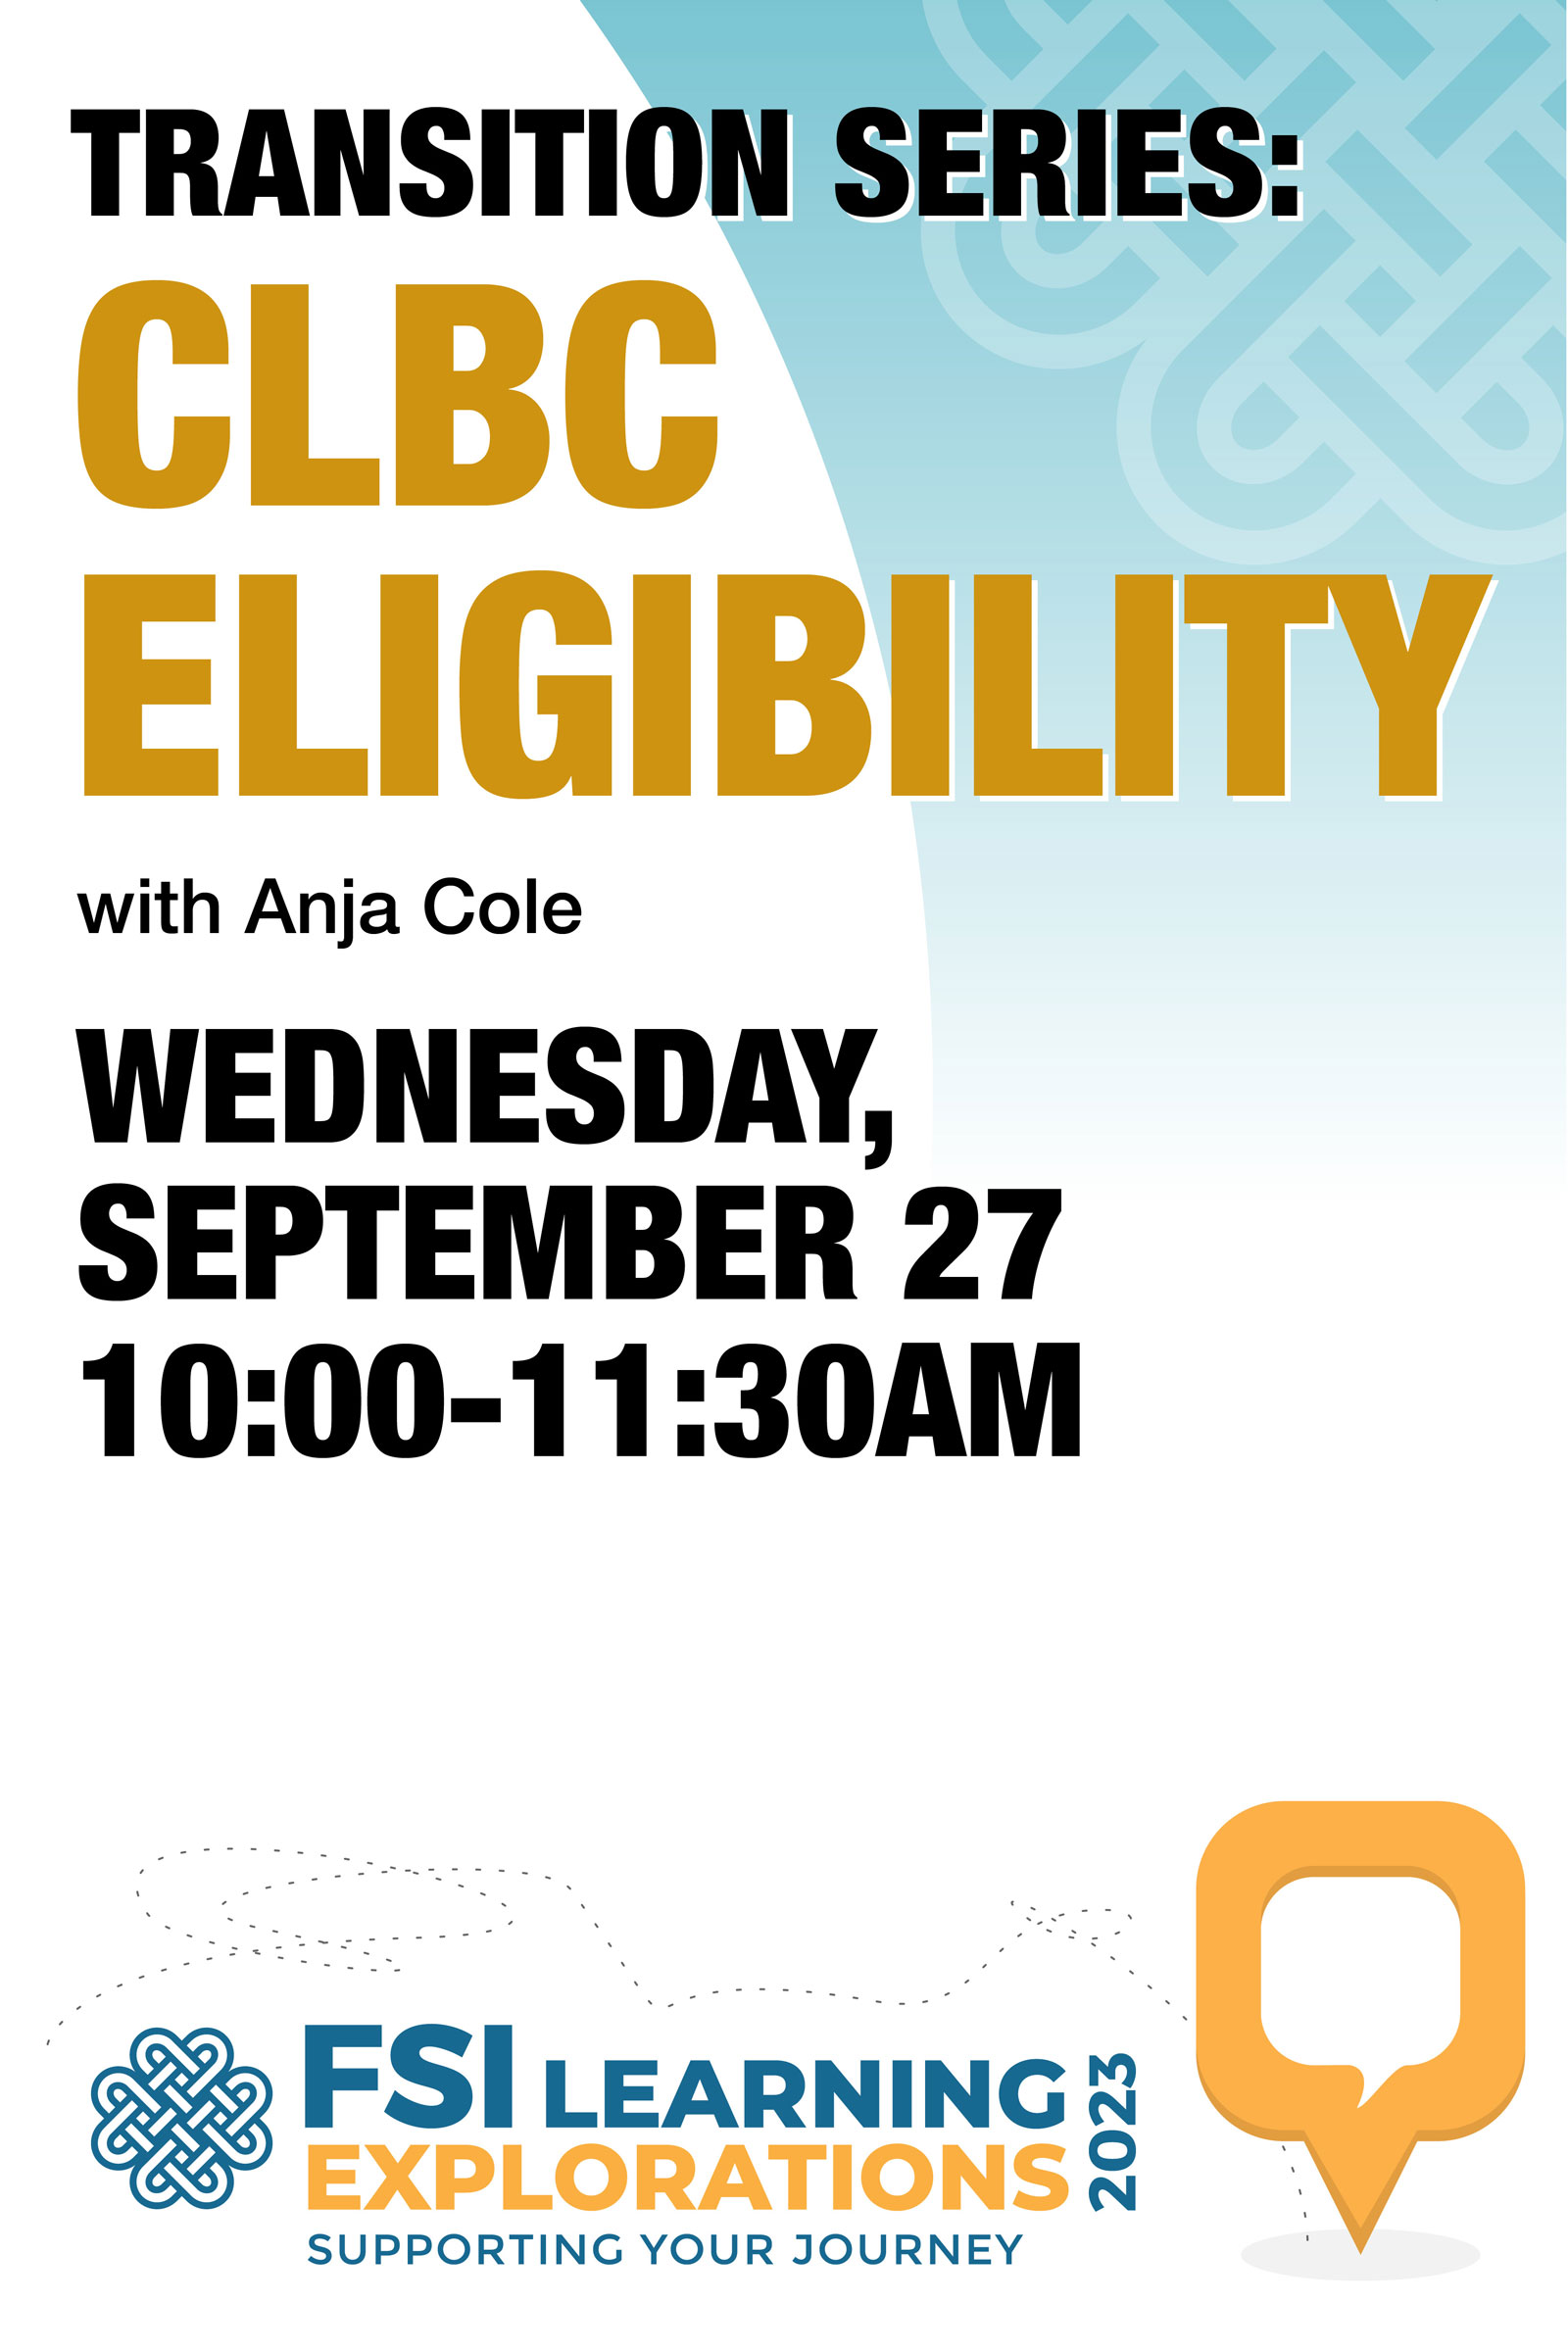 FSI Learning Explorations ~ Transition Series: CLBC Eligibility